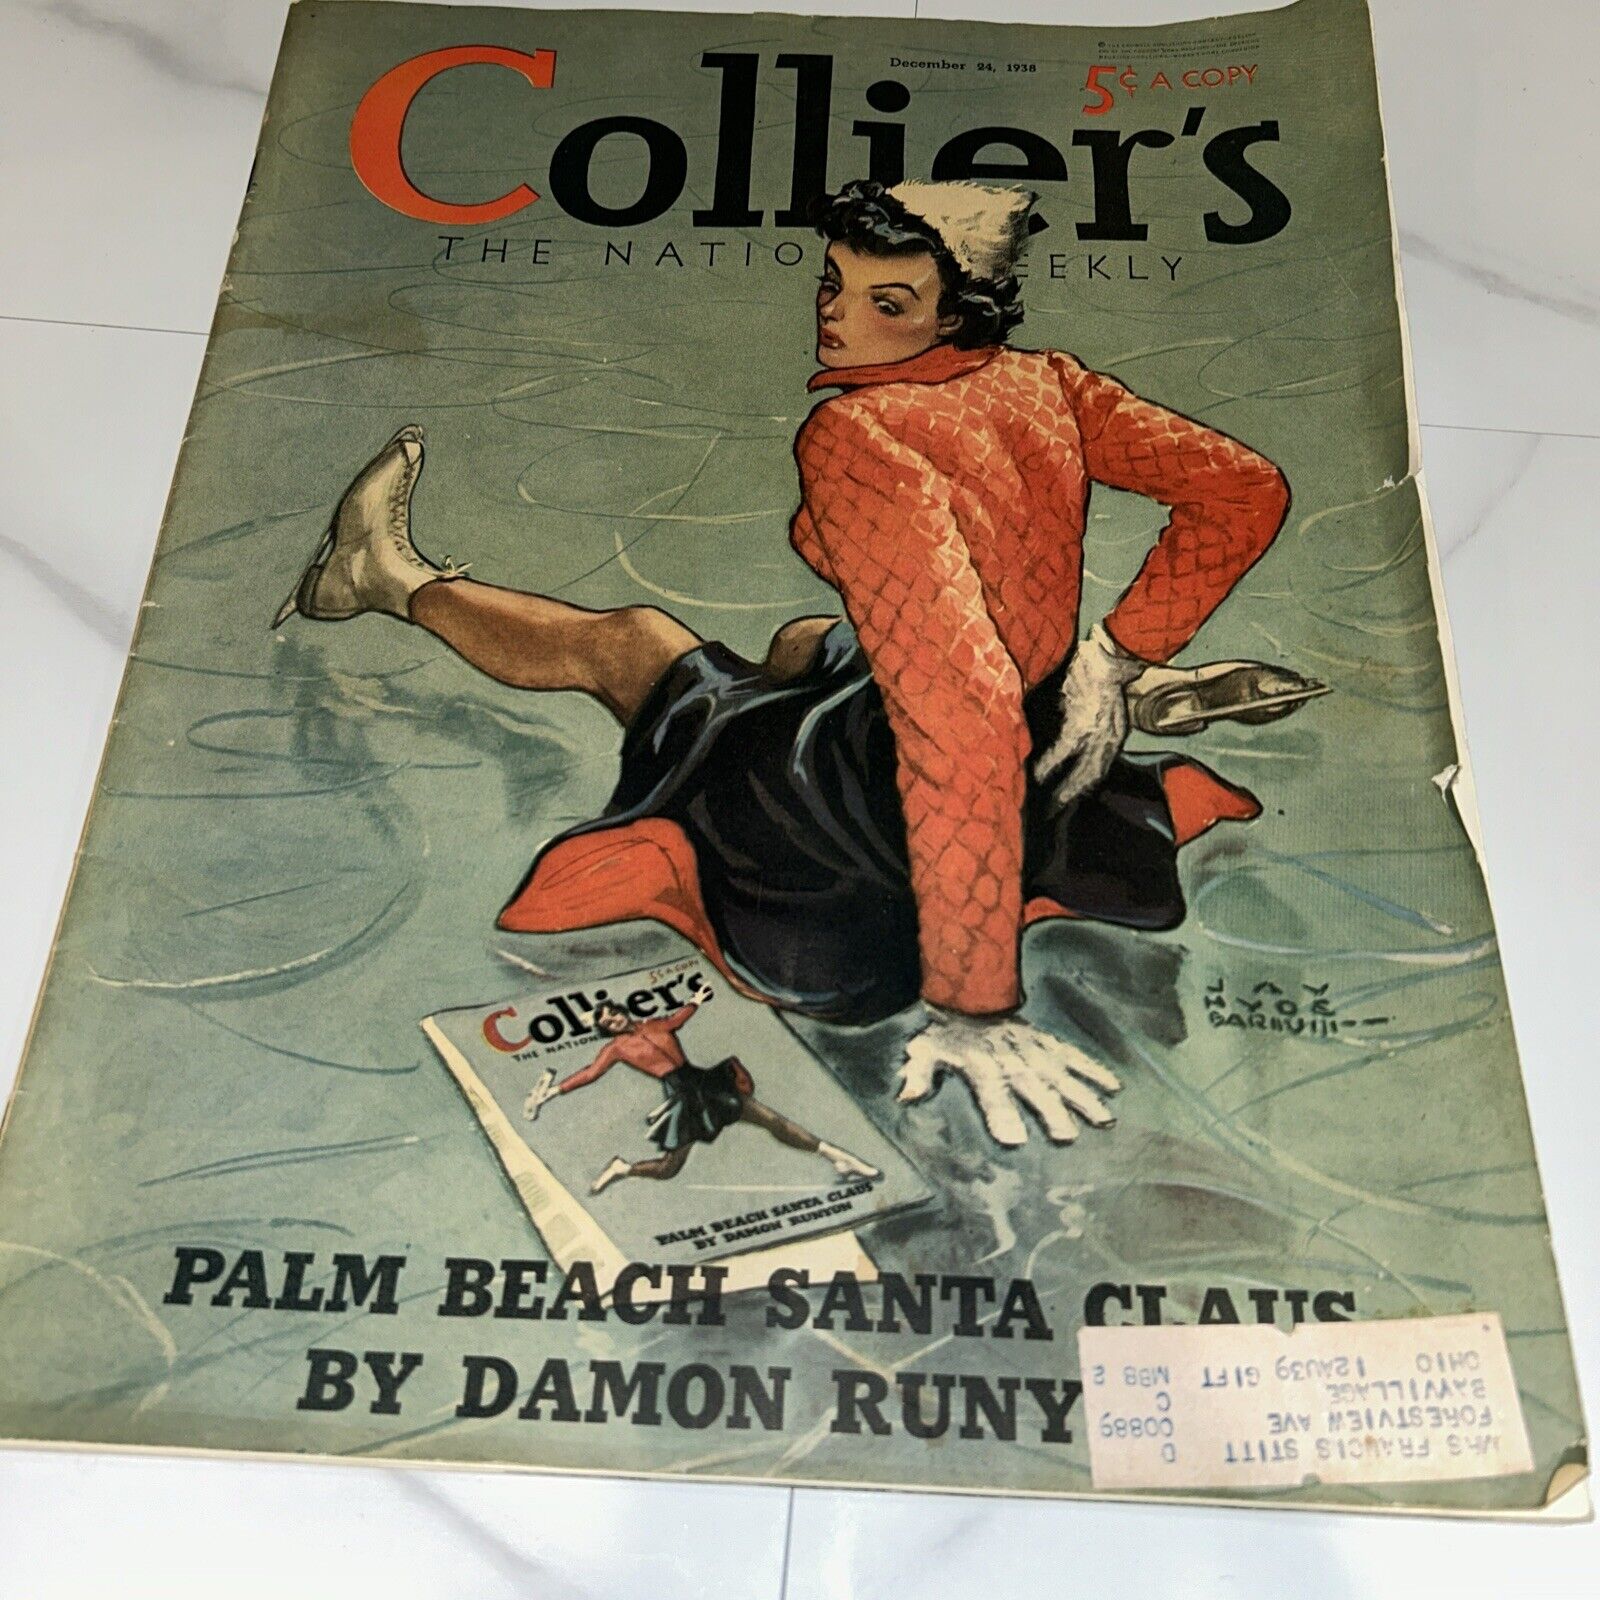 December 24, 1938 Collier’s Weekly Paper 5 Cent Magazine 